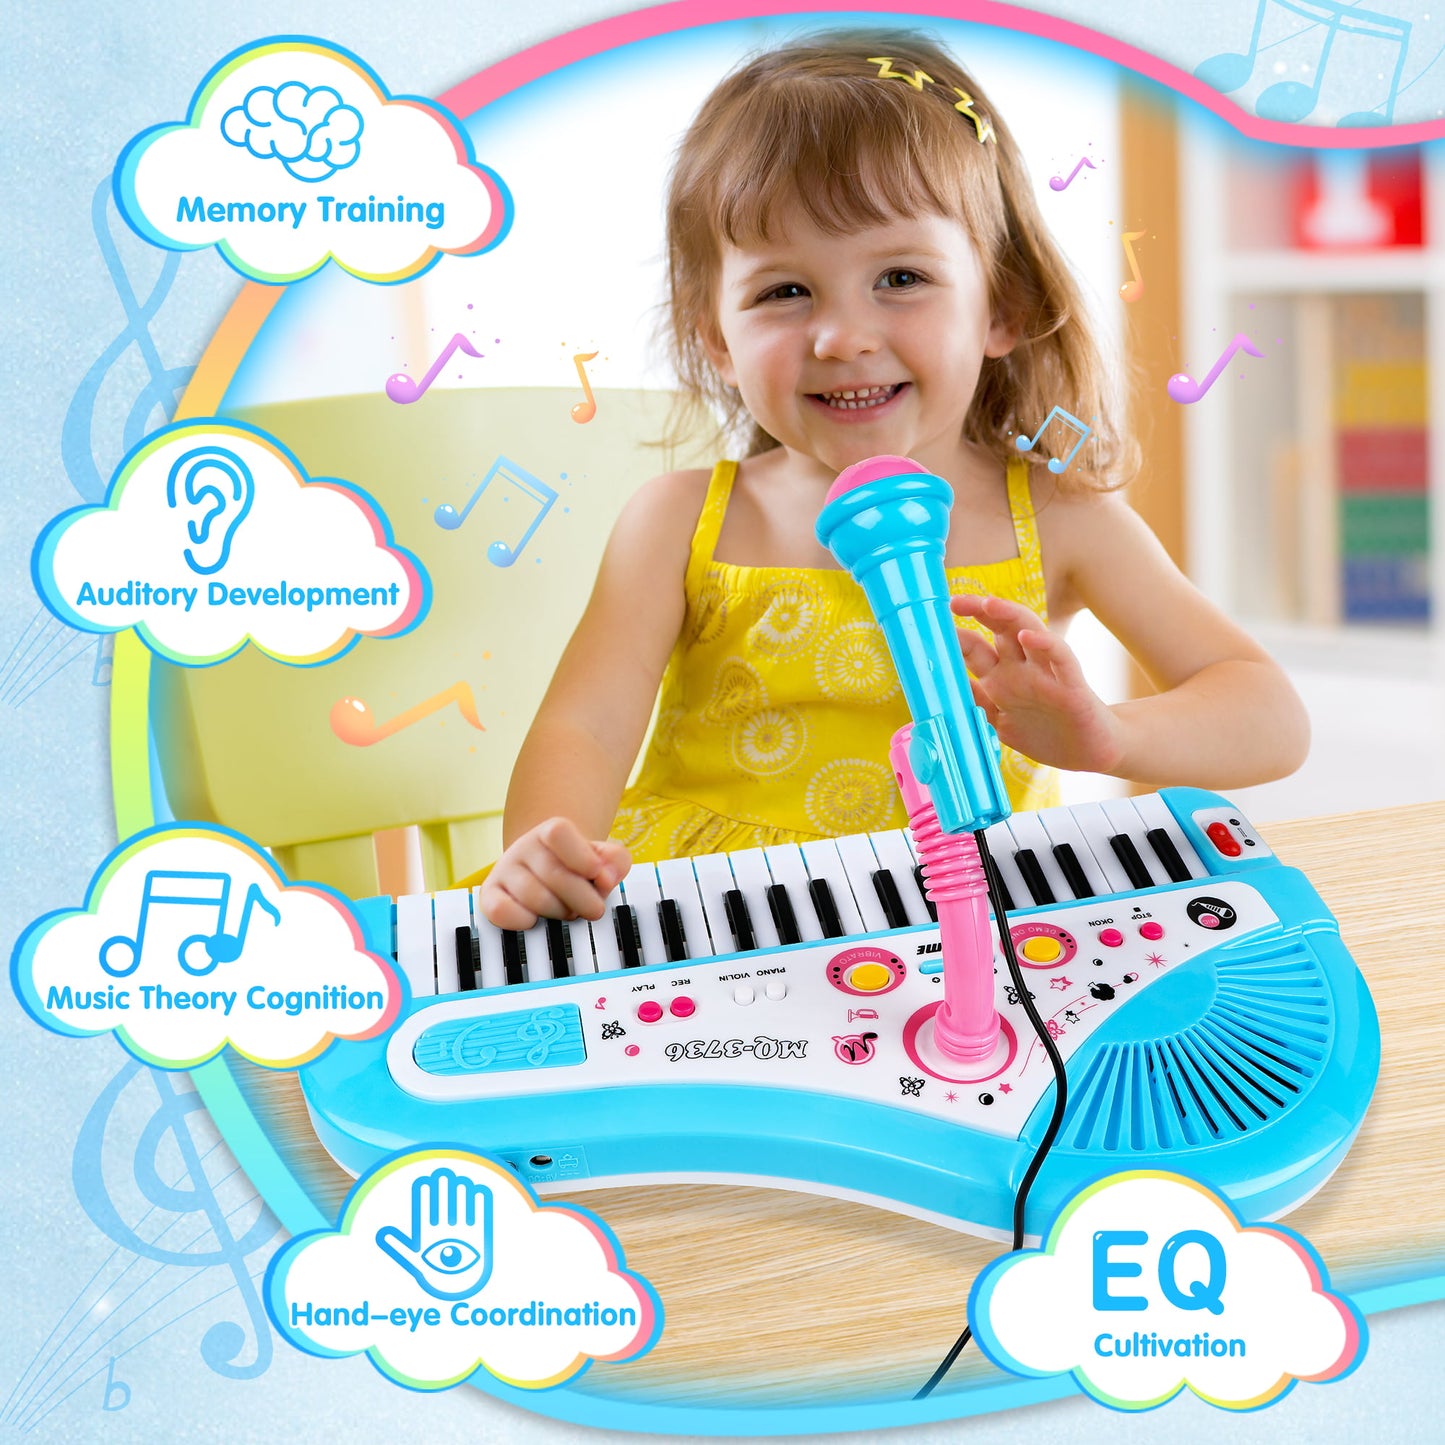 Baby Piano Toys for Kids, Blue Musical Keyboard Instrument with Microphone for Toddlers Boys Girls Christmas Gift Aged 4 5 6+, Musical Birthday Gift for Kids 3+